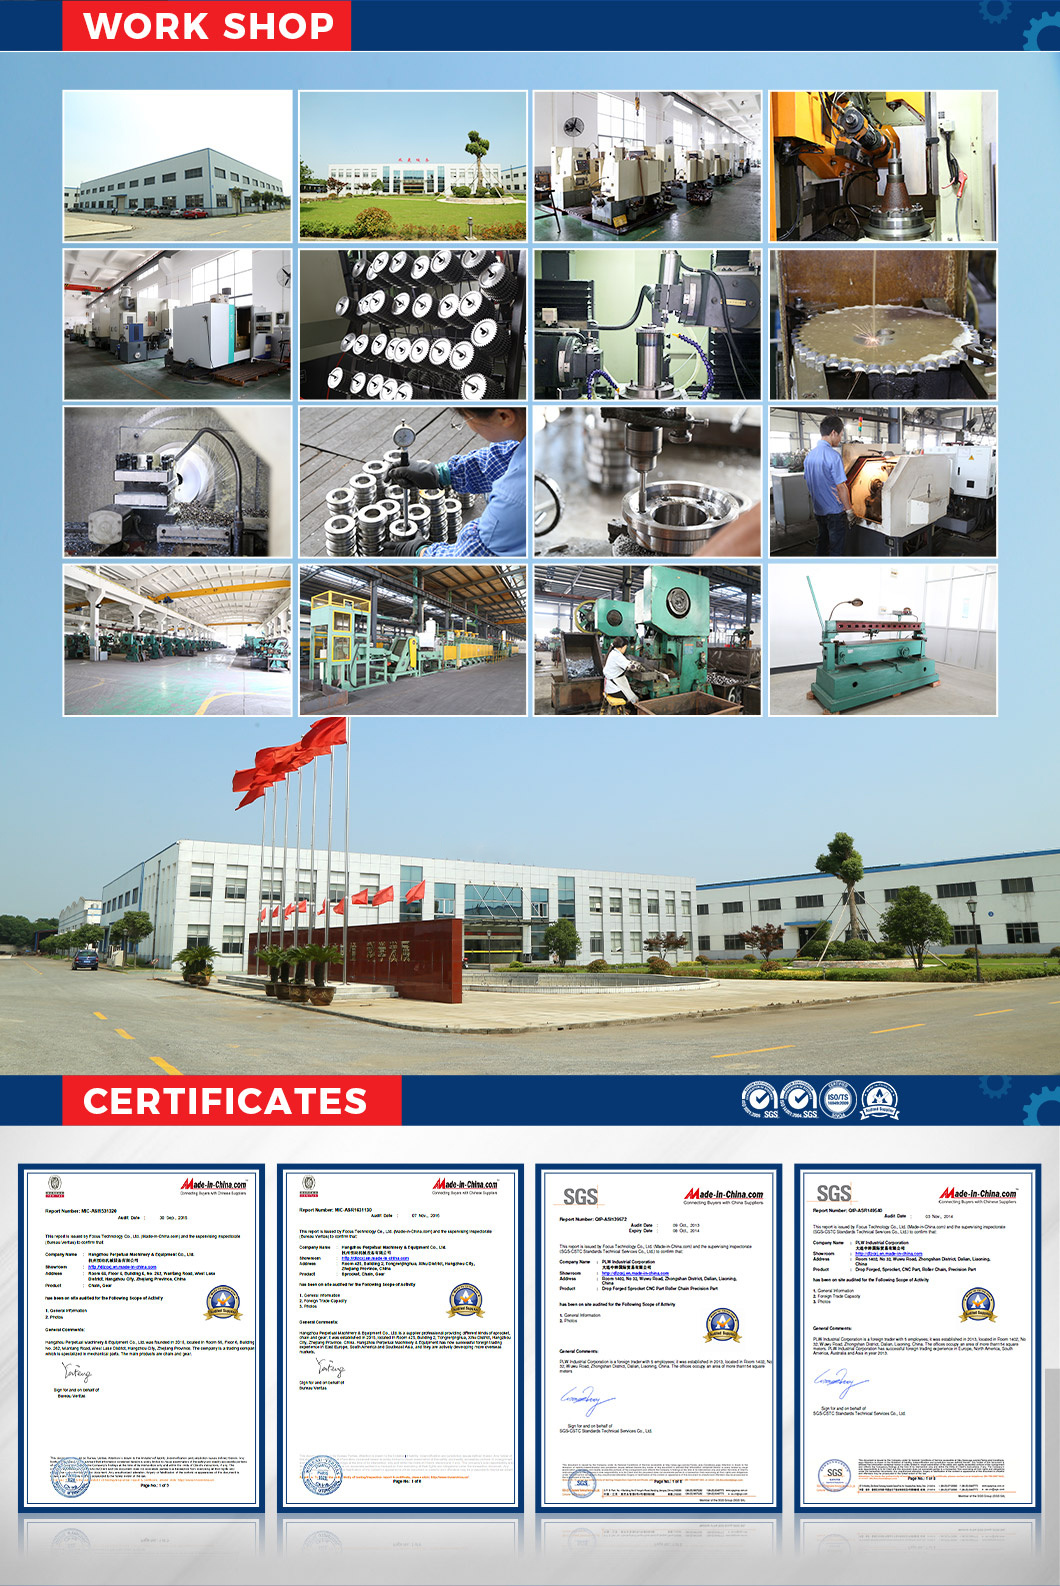 Wholesale Price Industrial Standard Durable Top Transmission Hardware Rubber Conveyor Chain